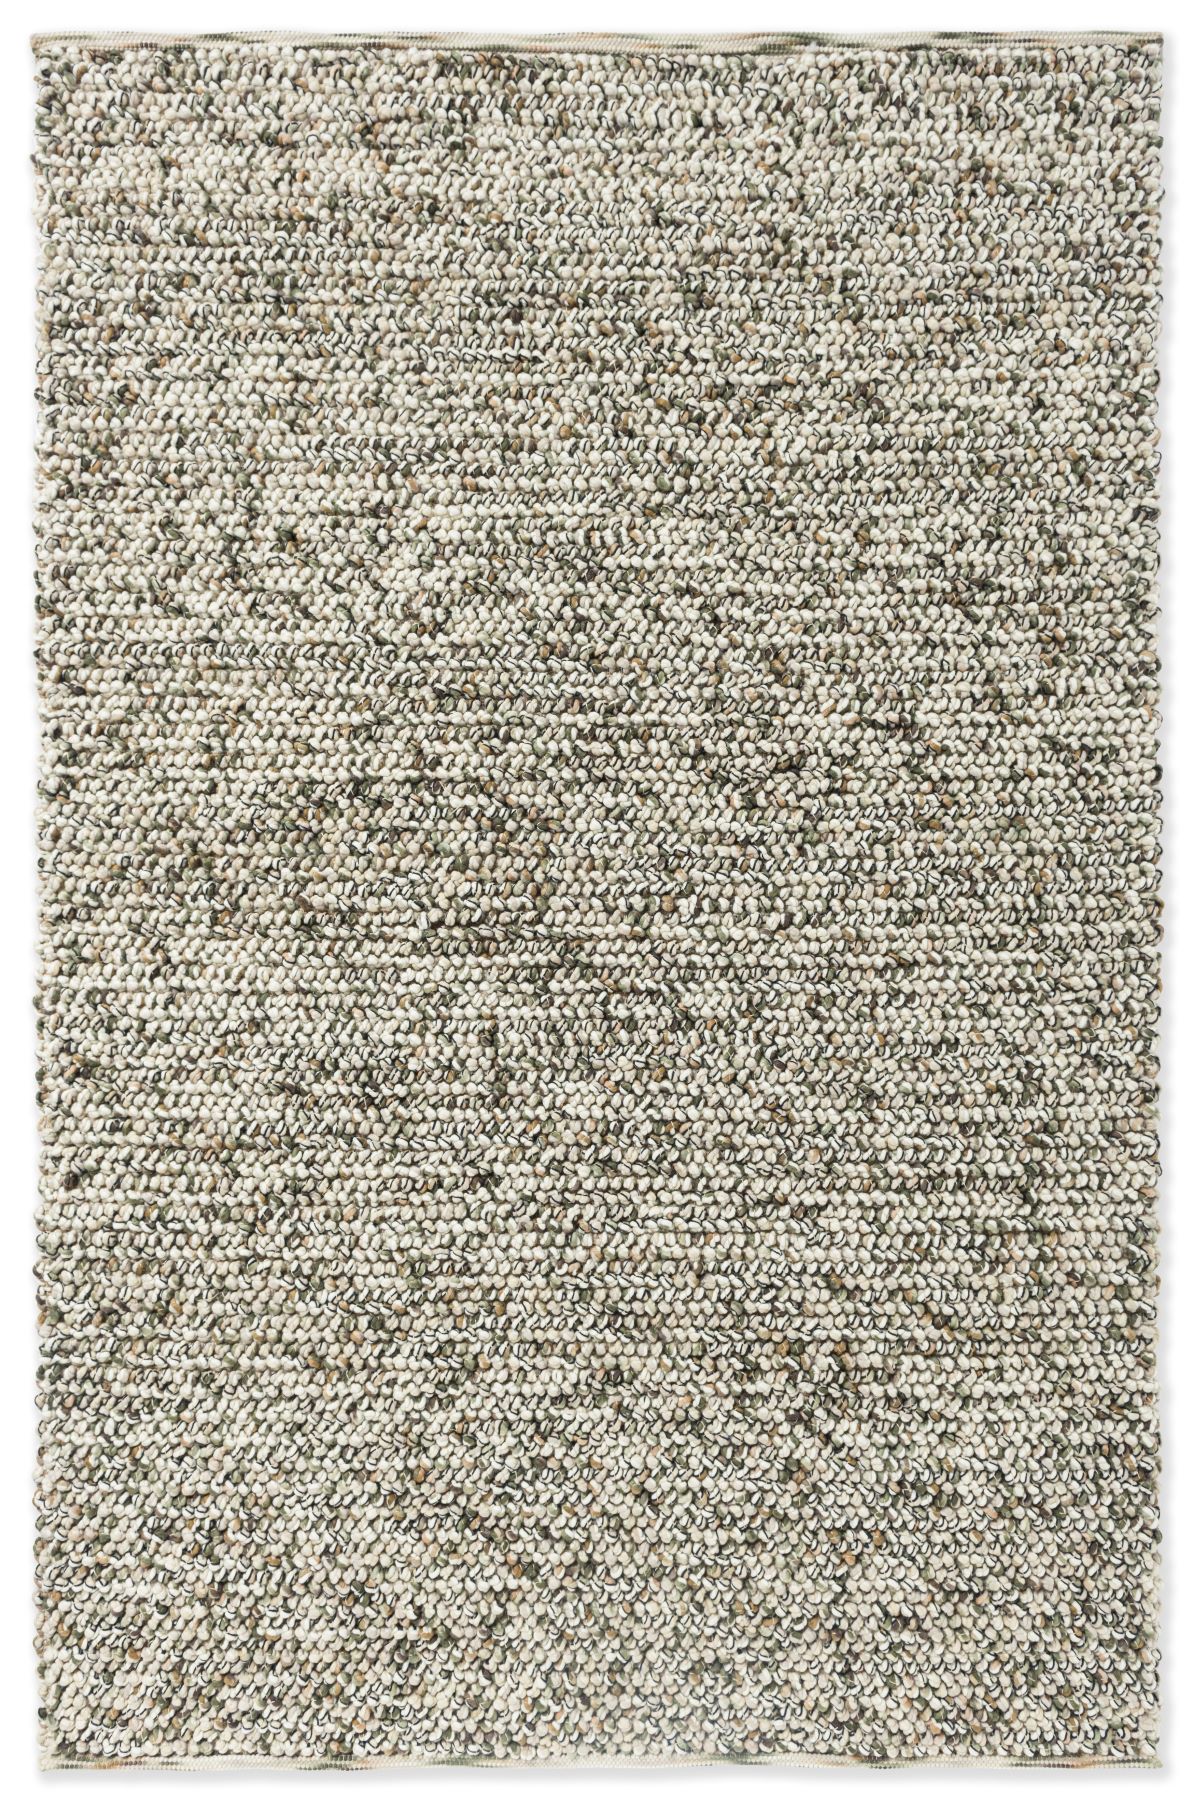 brink-and-campman-rug-marble-moss-green-029537